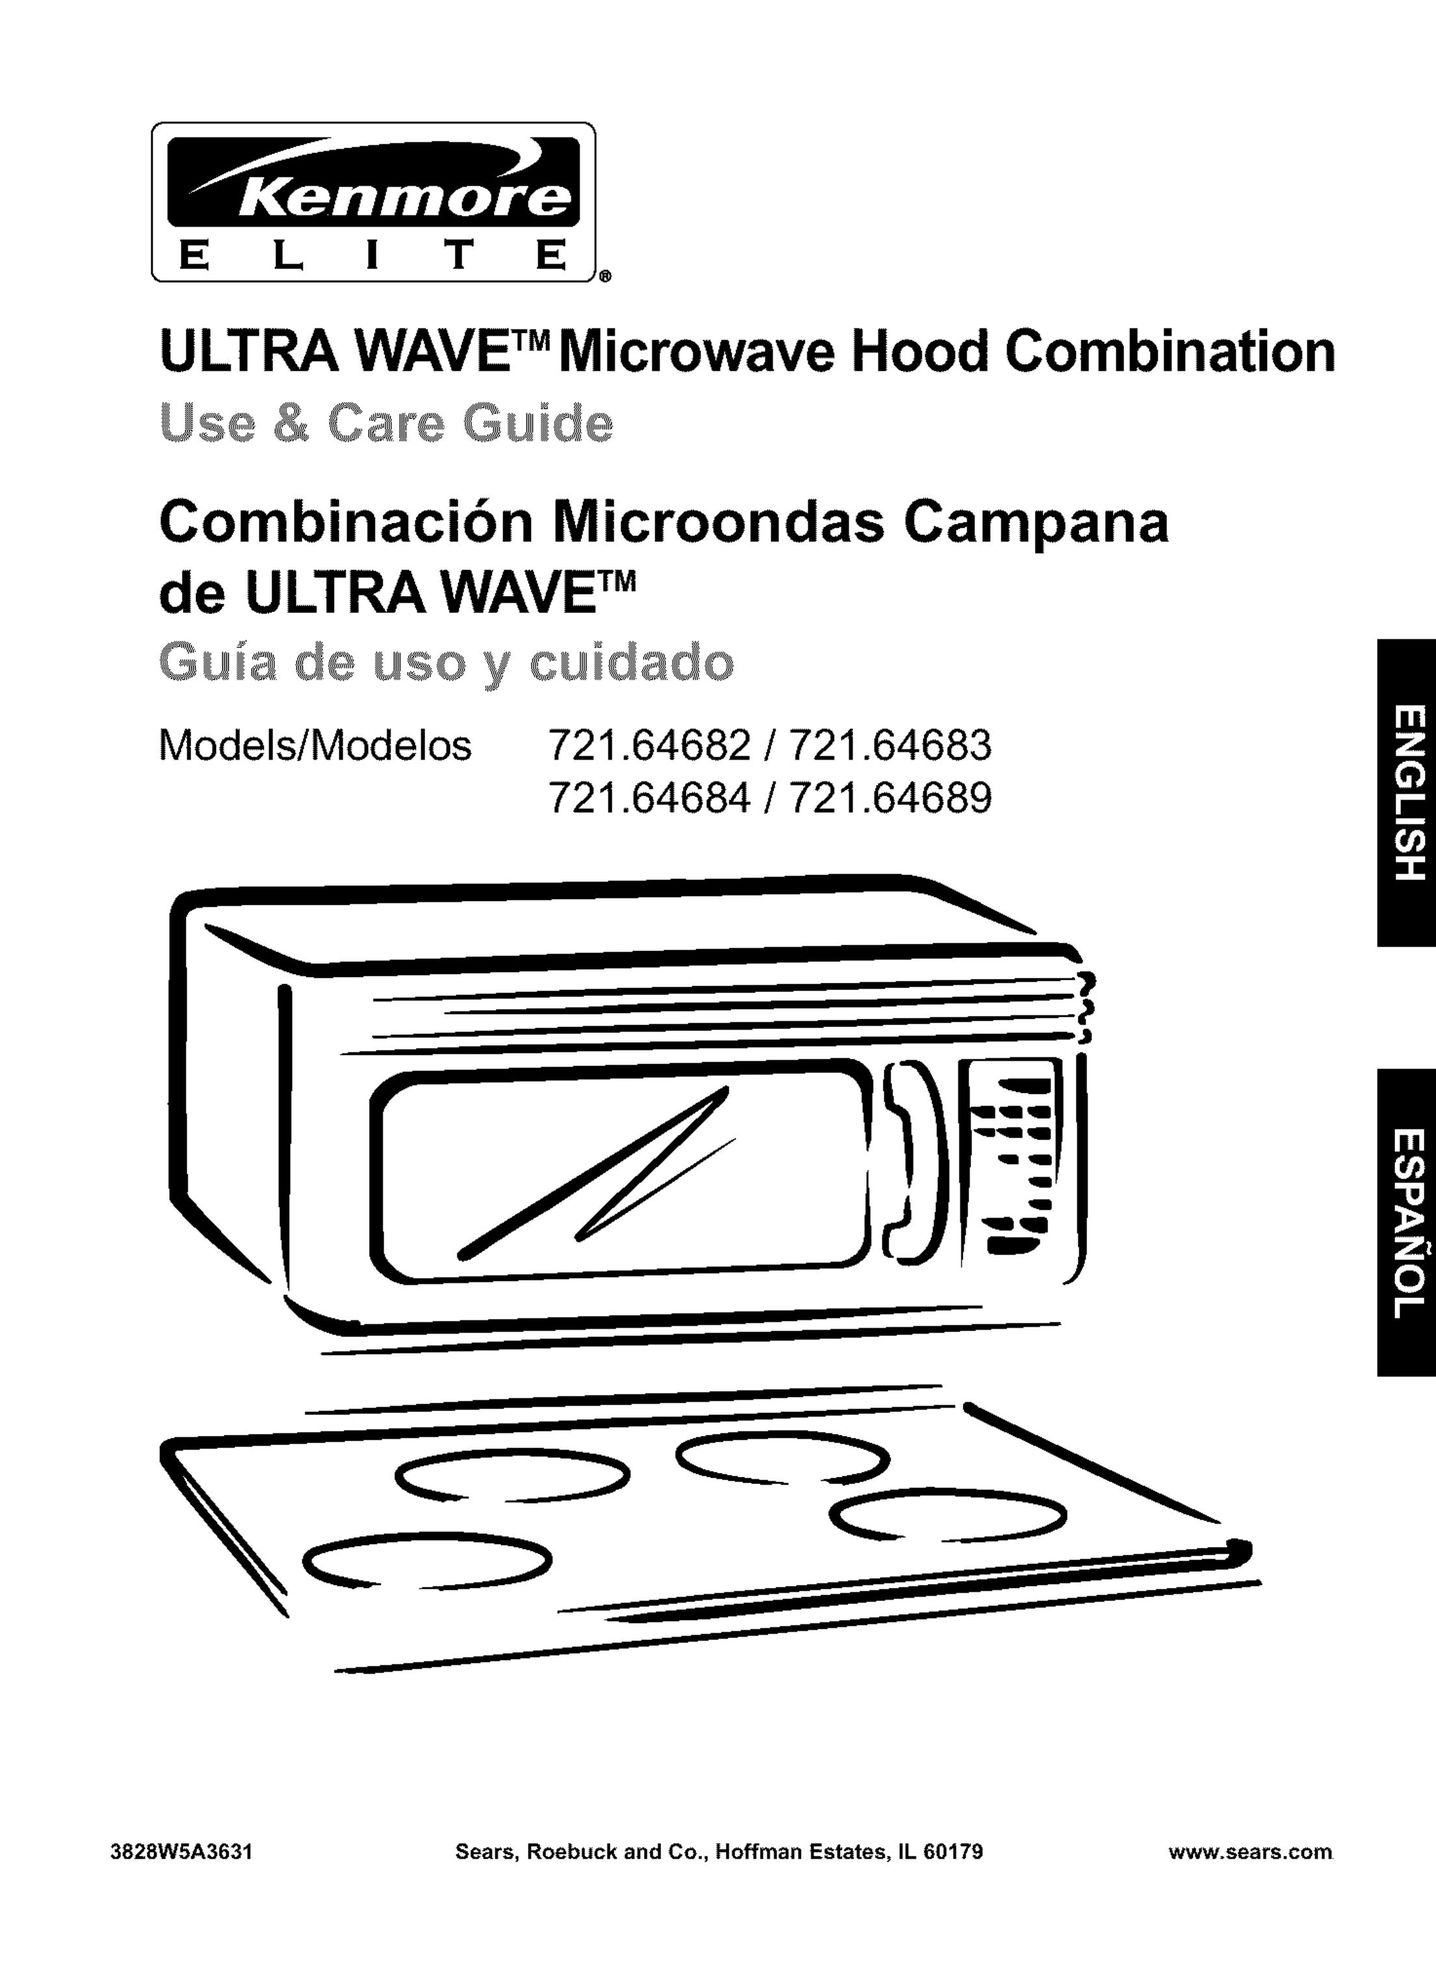 Kenmore 721.64683 Microwave Oven User Manual